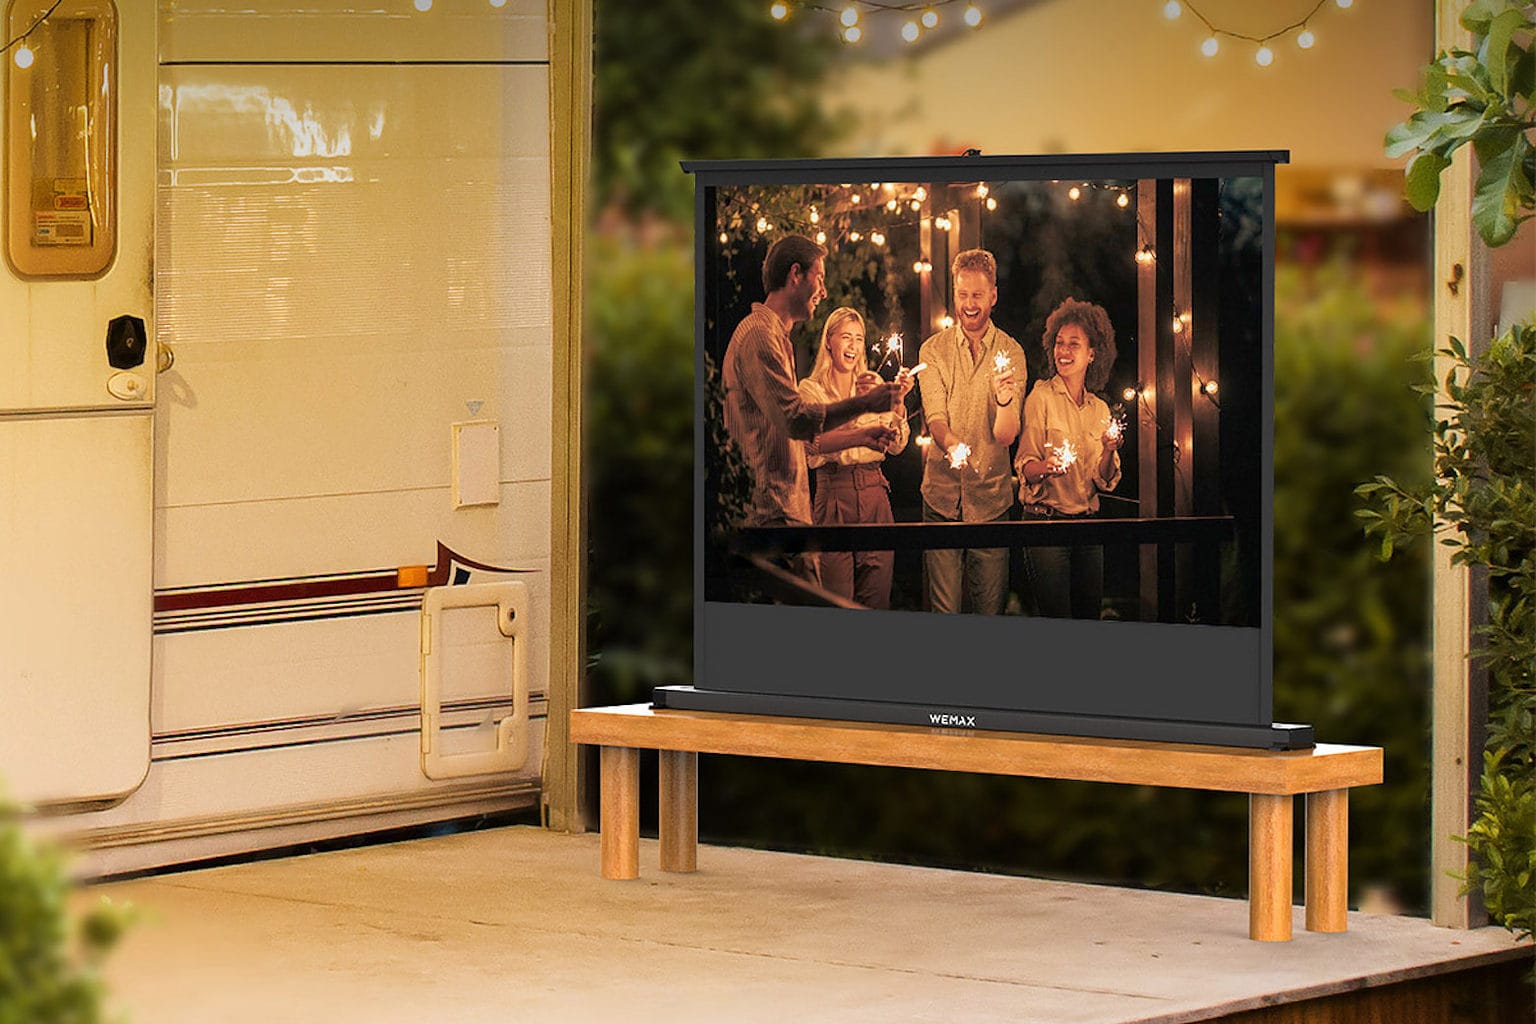 Work movie magic on your Apple TV with these home theater accessories.